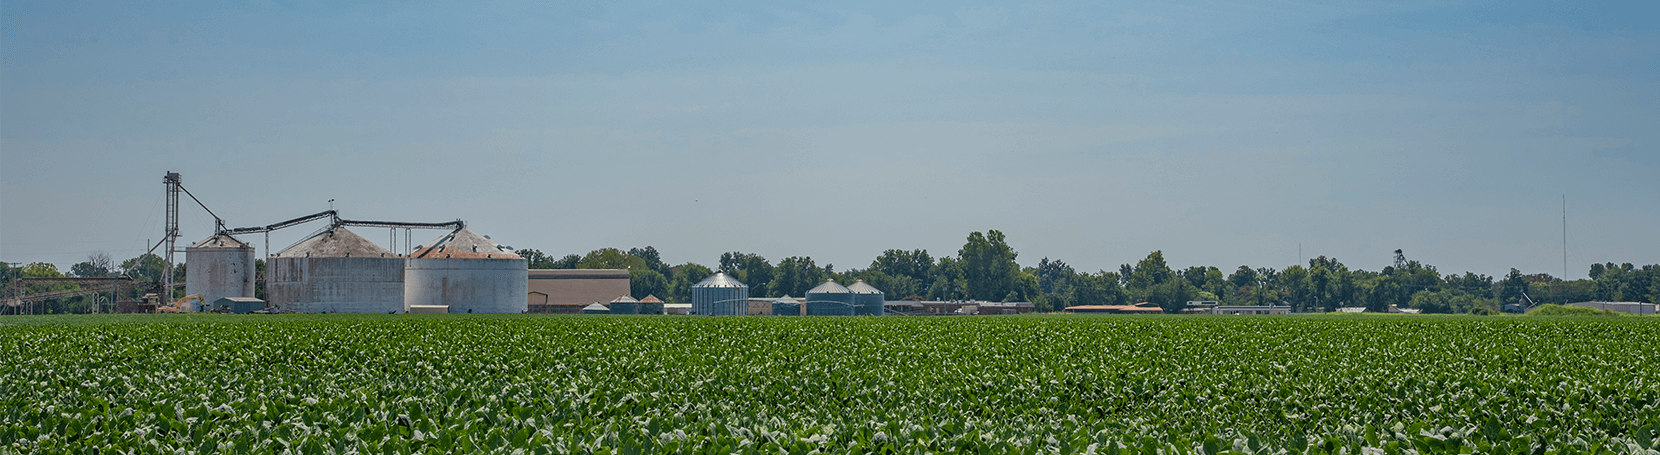 Agriculture field with silos.